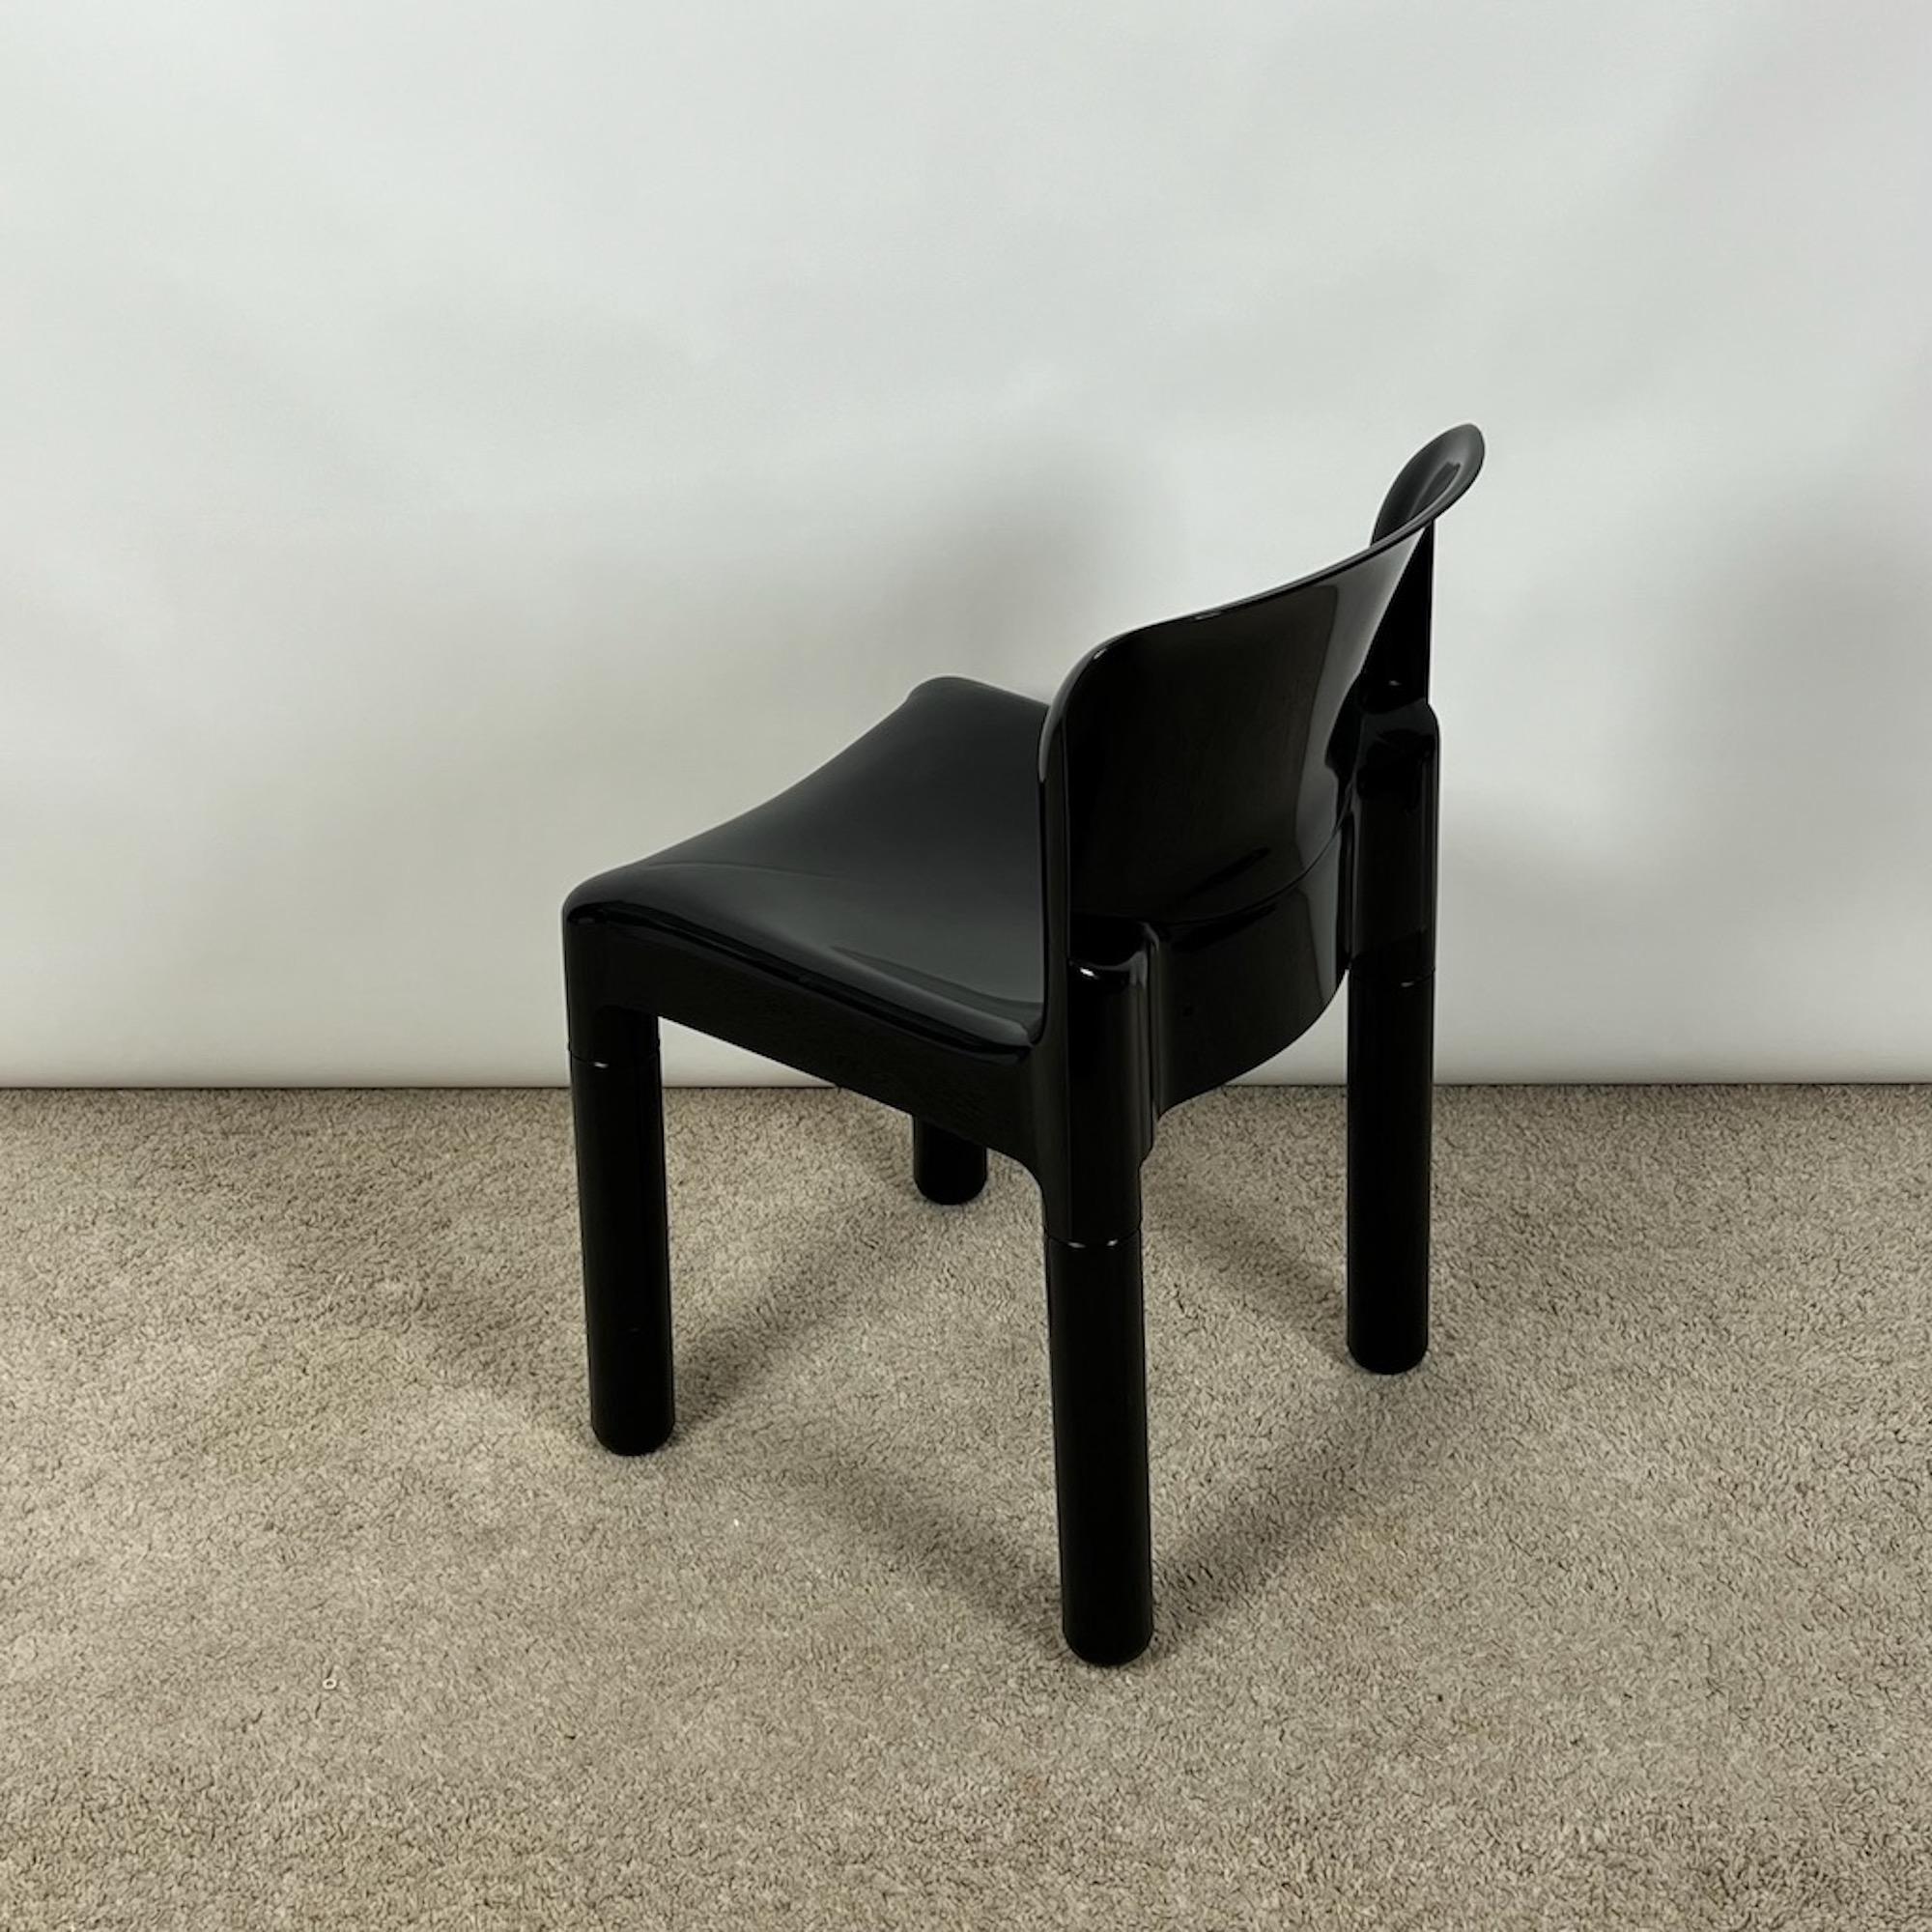 Late 20th Century Kartell Model 4875 Chair by Carlo Bartoli - 1985 Edition New Old Stock in Black